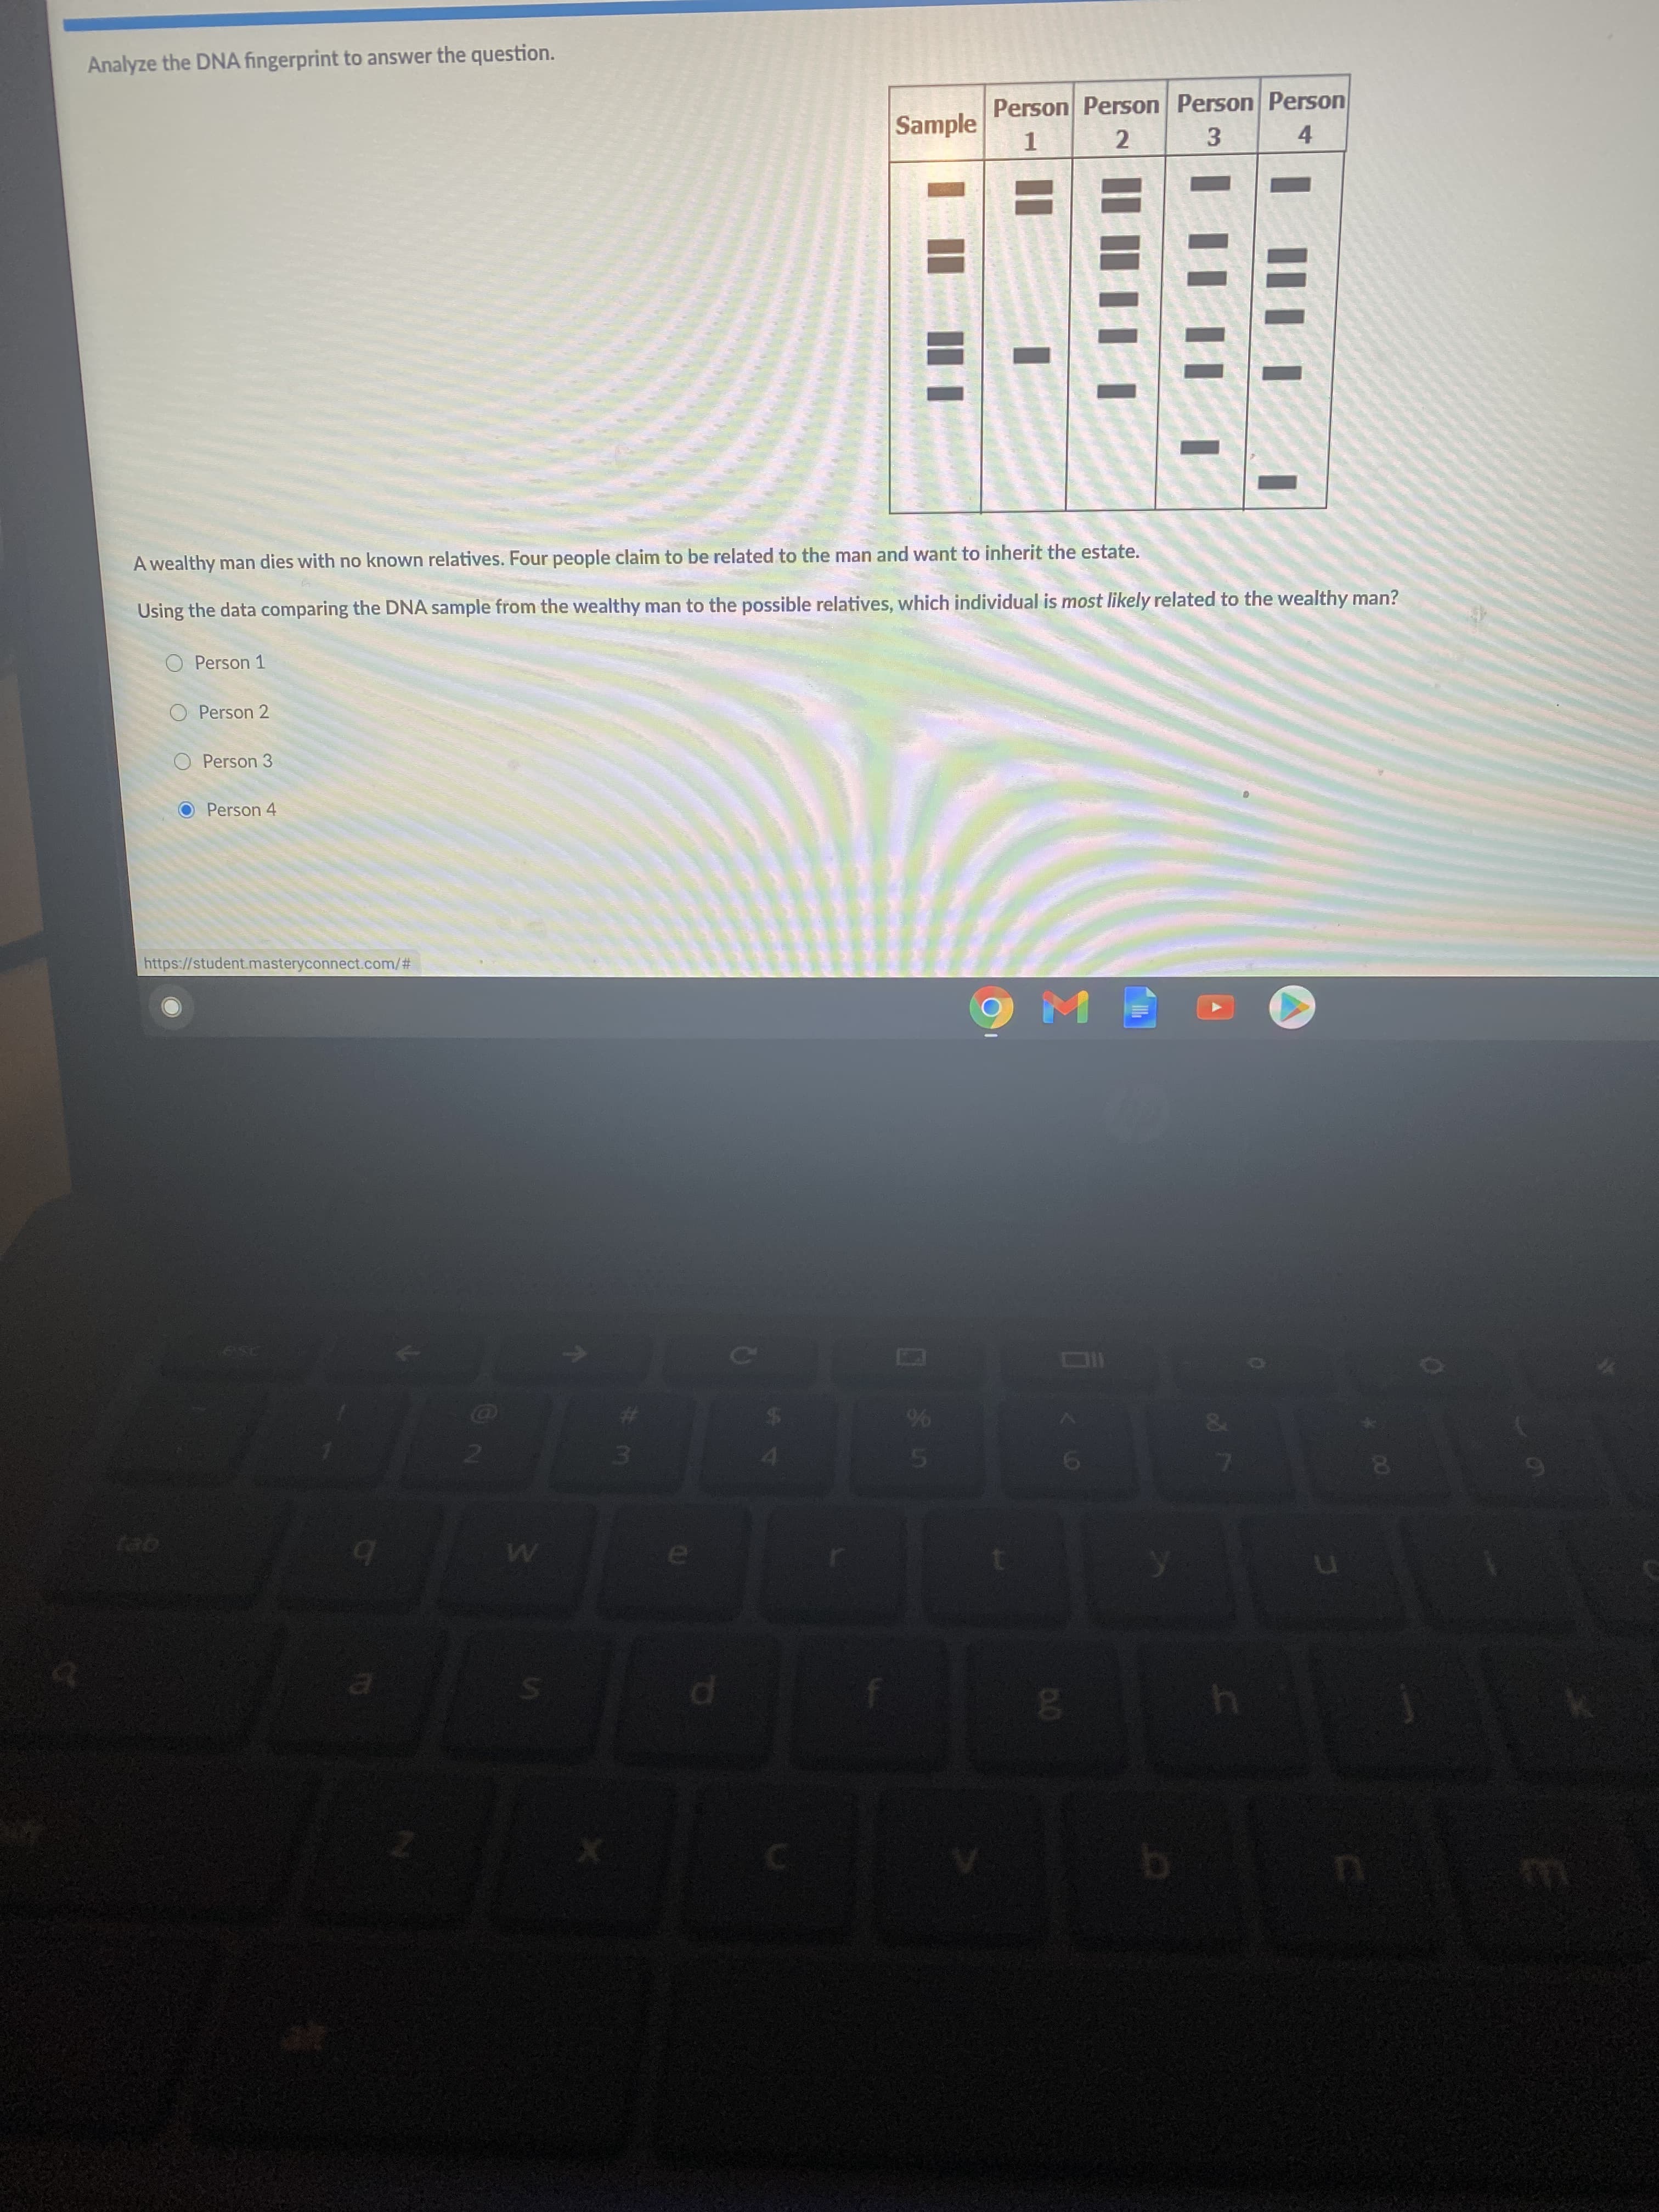 Using the data comparing the DNA sample from the wealthy man to the possible relatives, which individual is most likely related to the wealthy man?
